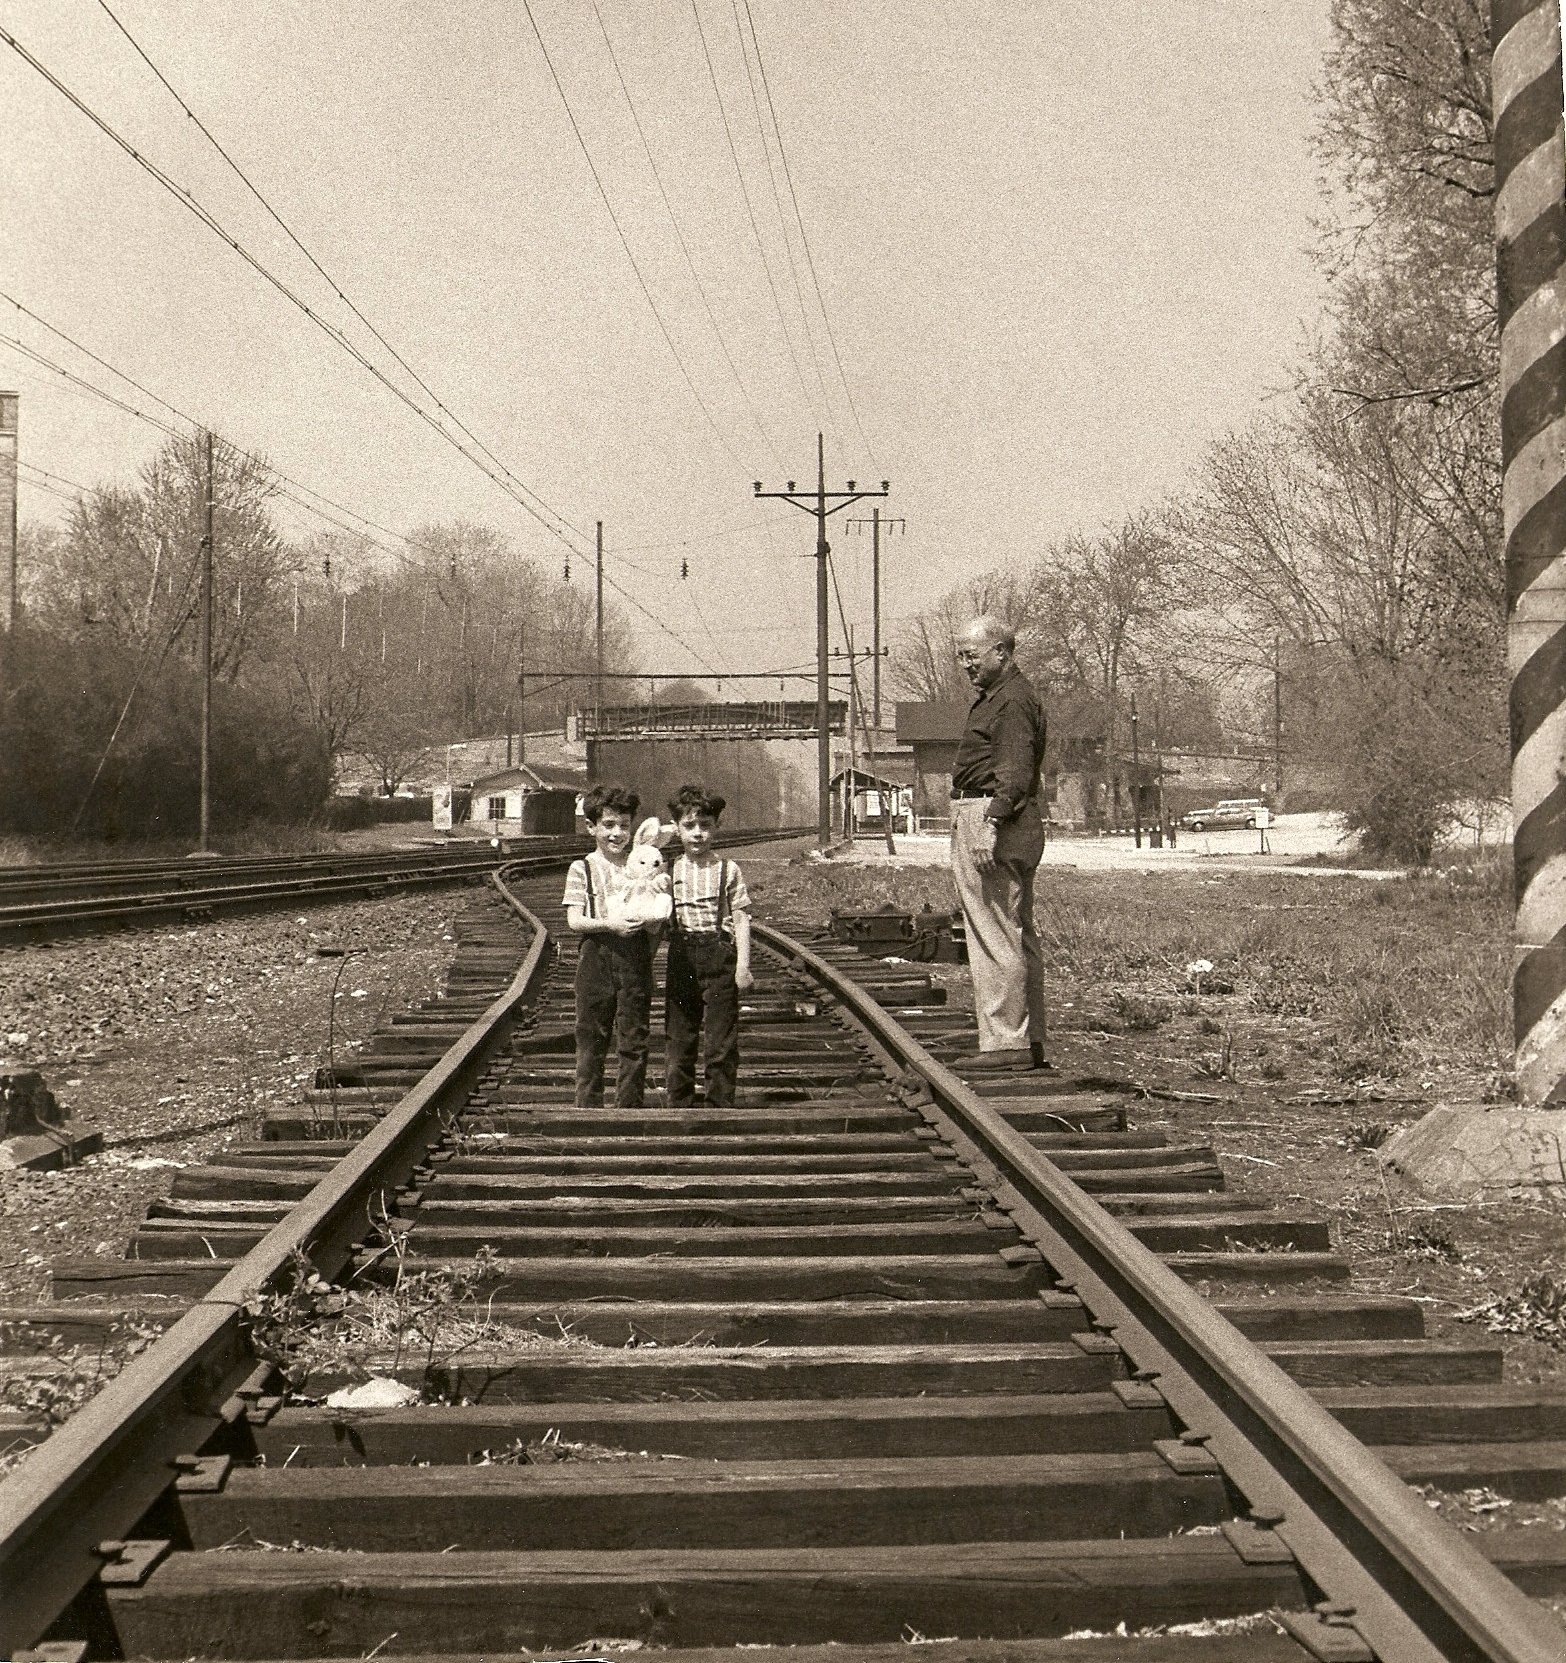  Bill and Frank as kids with their grandfather Joseph Tripcian along the tracks at Villanova Station, where their uncle was PRR Station Master 